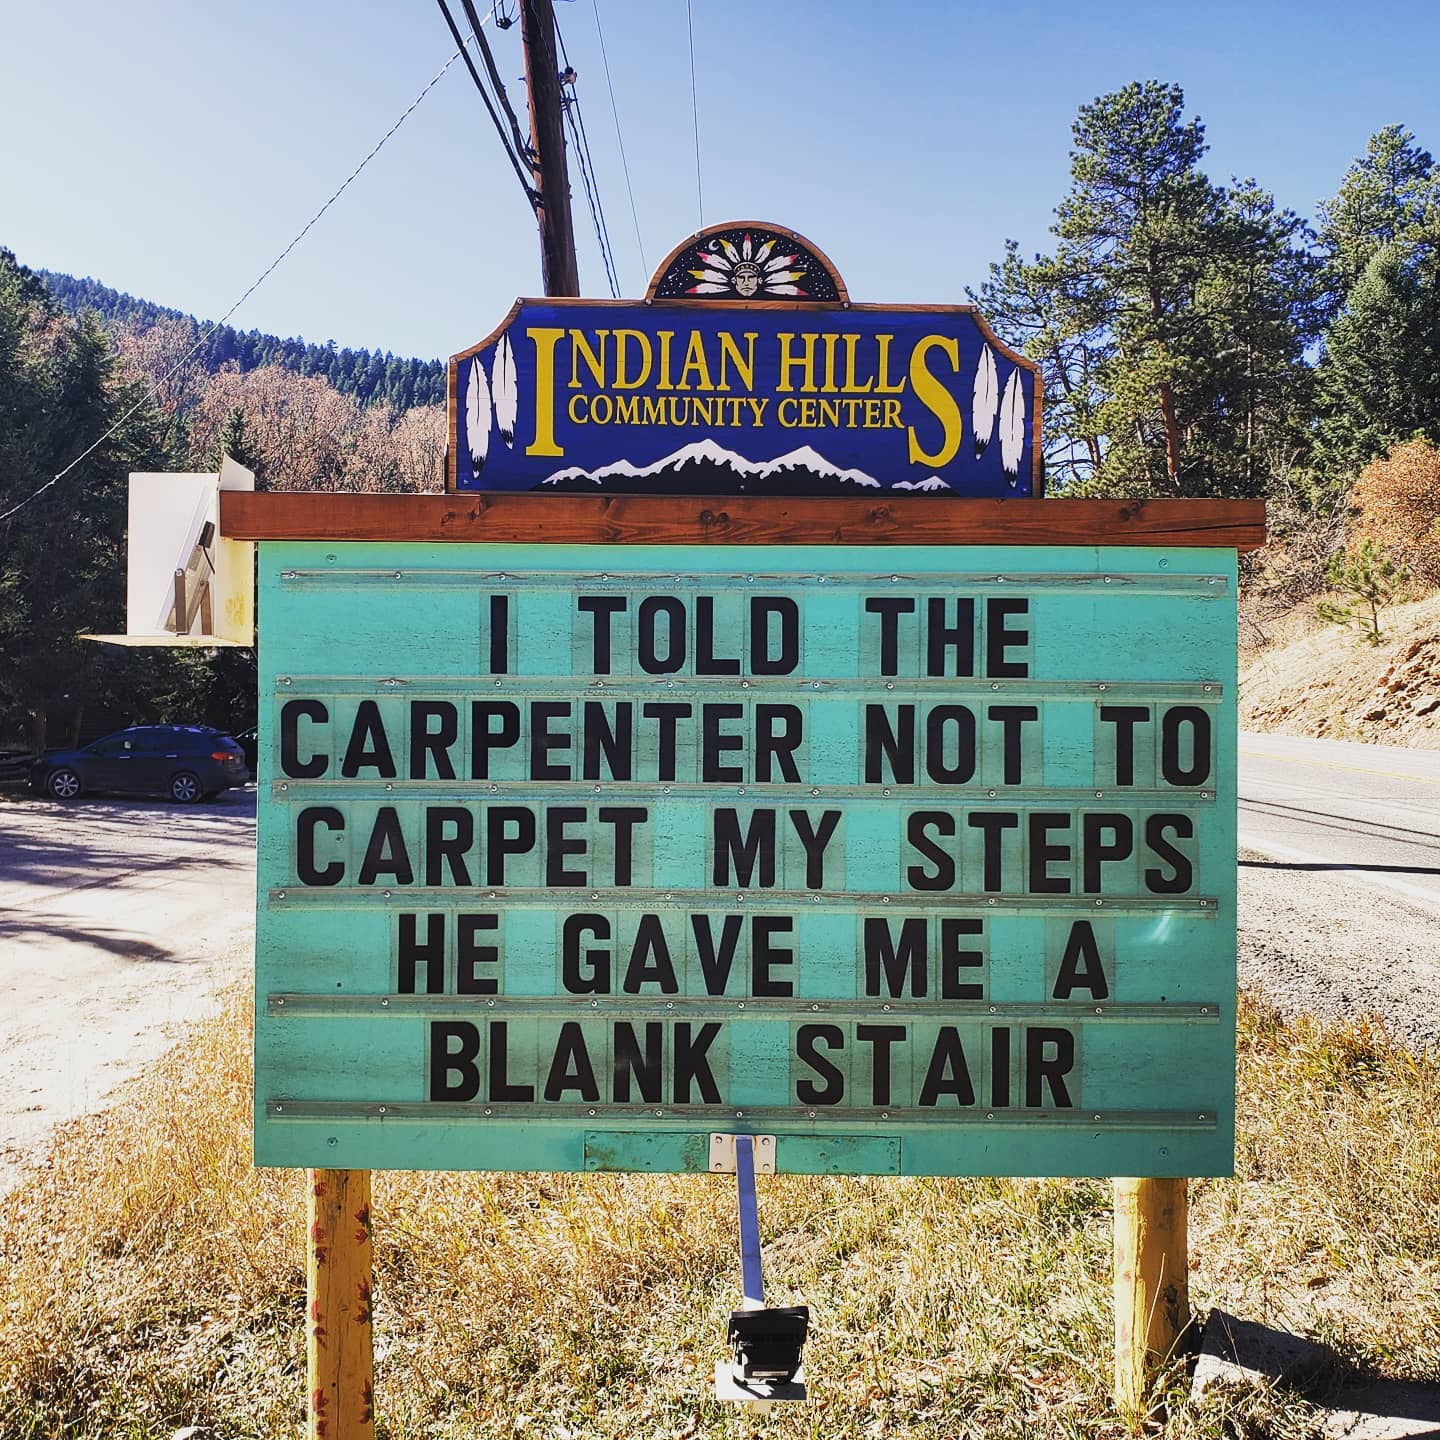 community sign that says: "I told the carpenter not to carpet my steps. he gave me a blank stare."